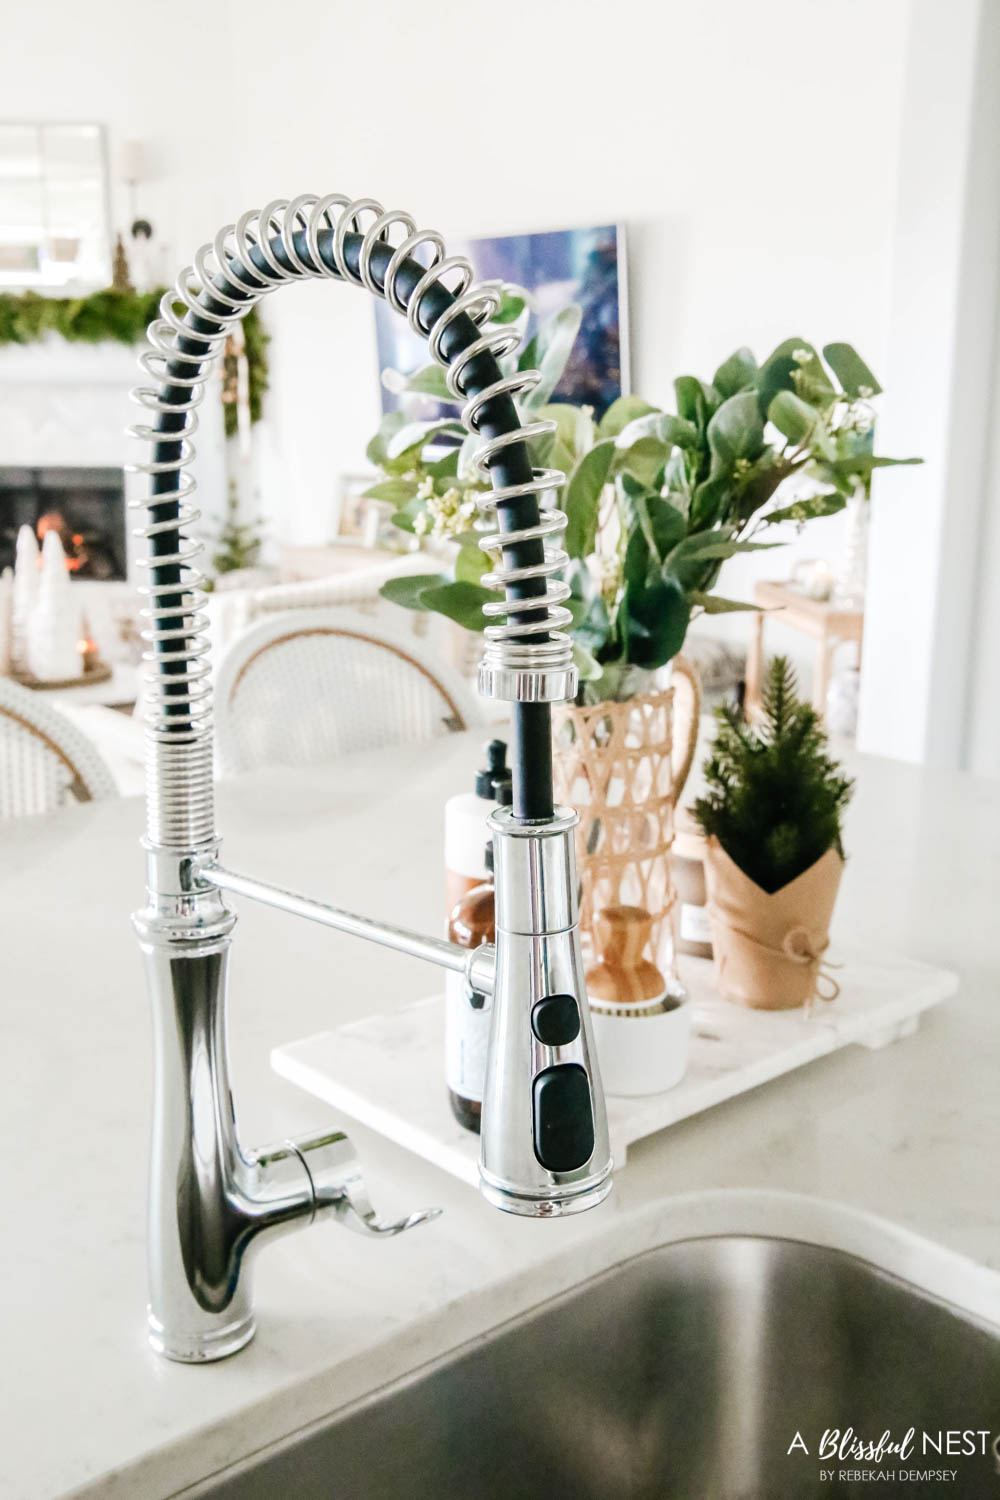 Kitchen faucet with a marble tray with soap and holiday greenery in a vase.